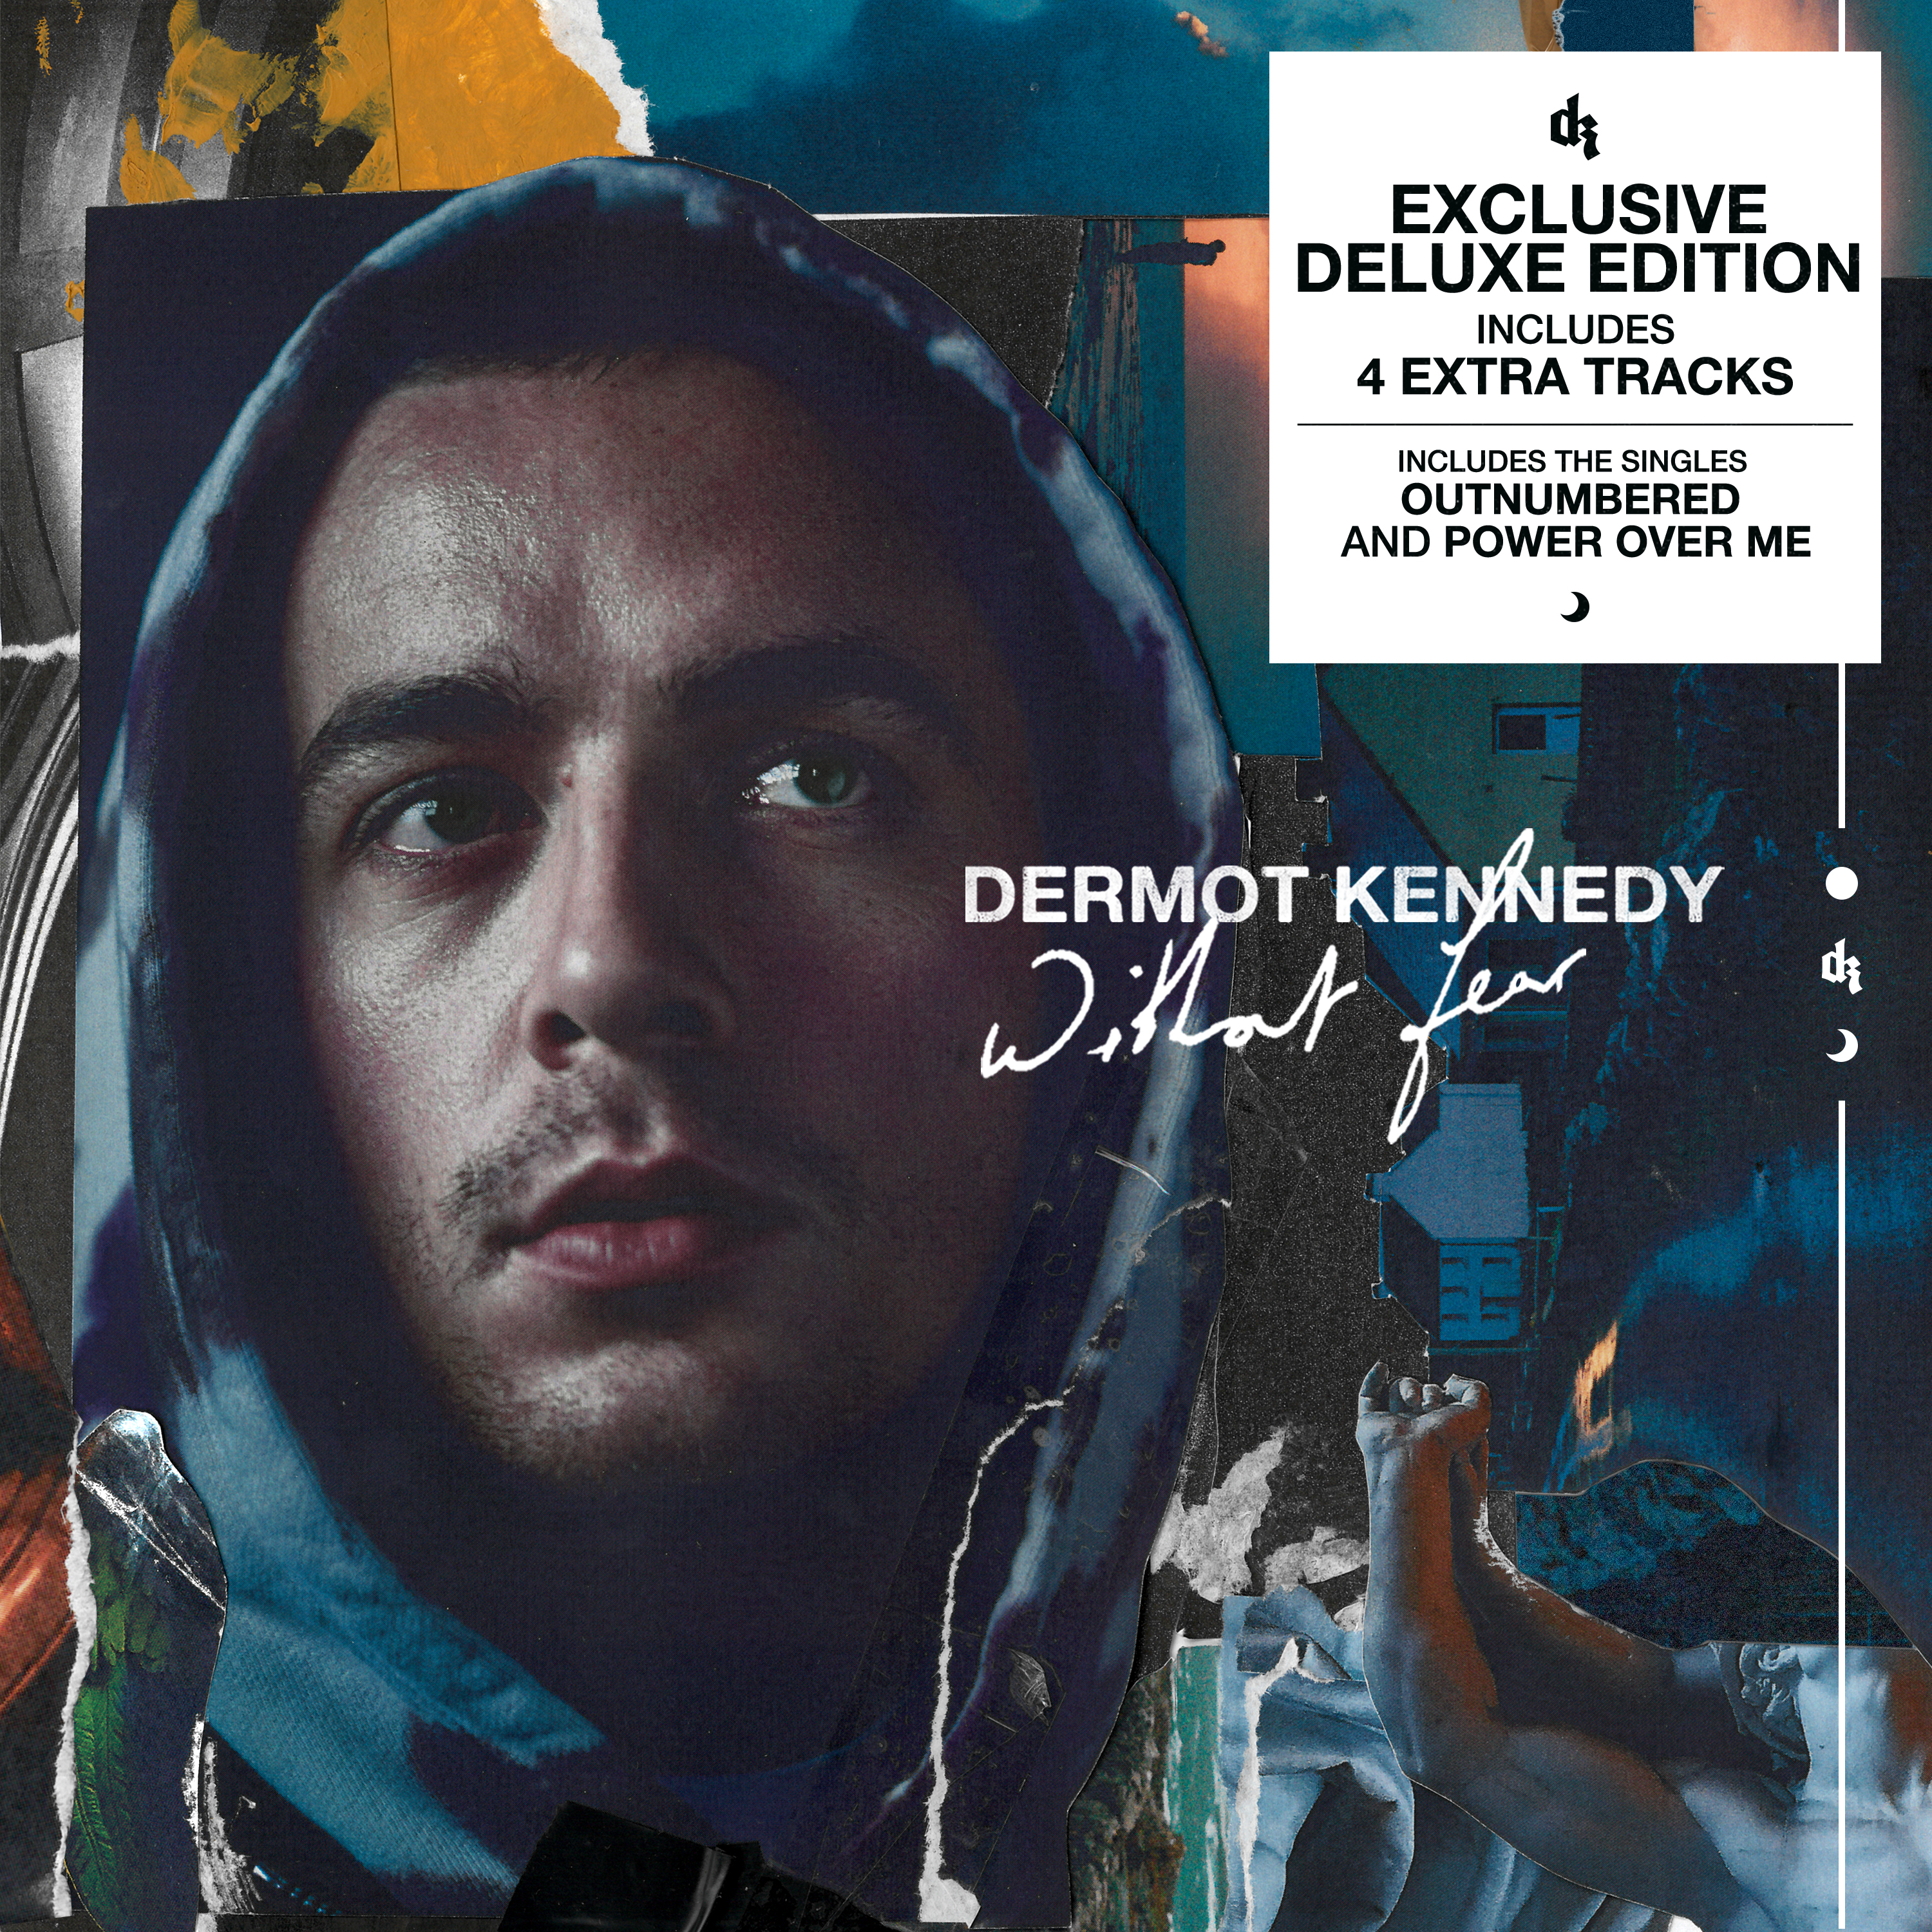 Fear Deluxe Without (CD) 4 - Bonustracks Edition) - Dermot Kennedy mit (Exklusiv